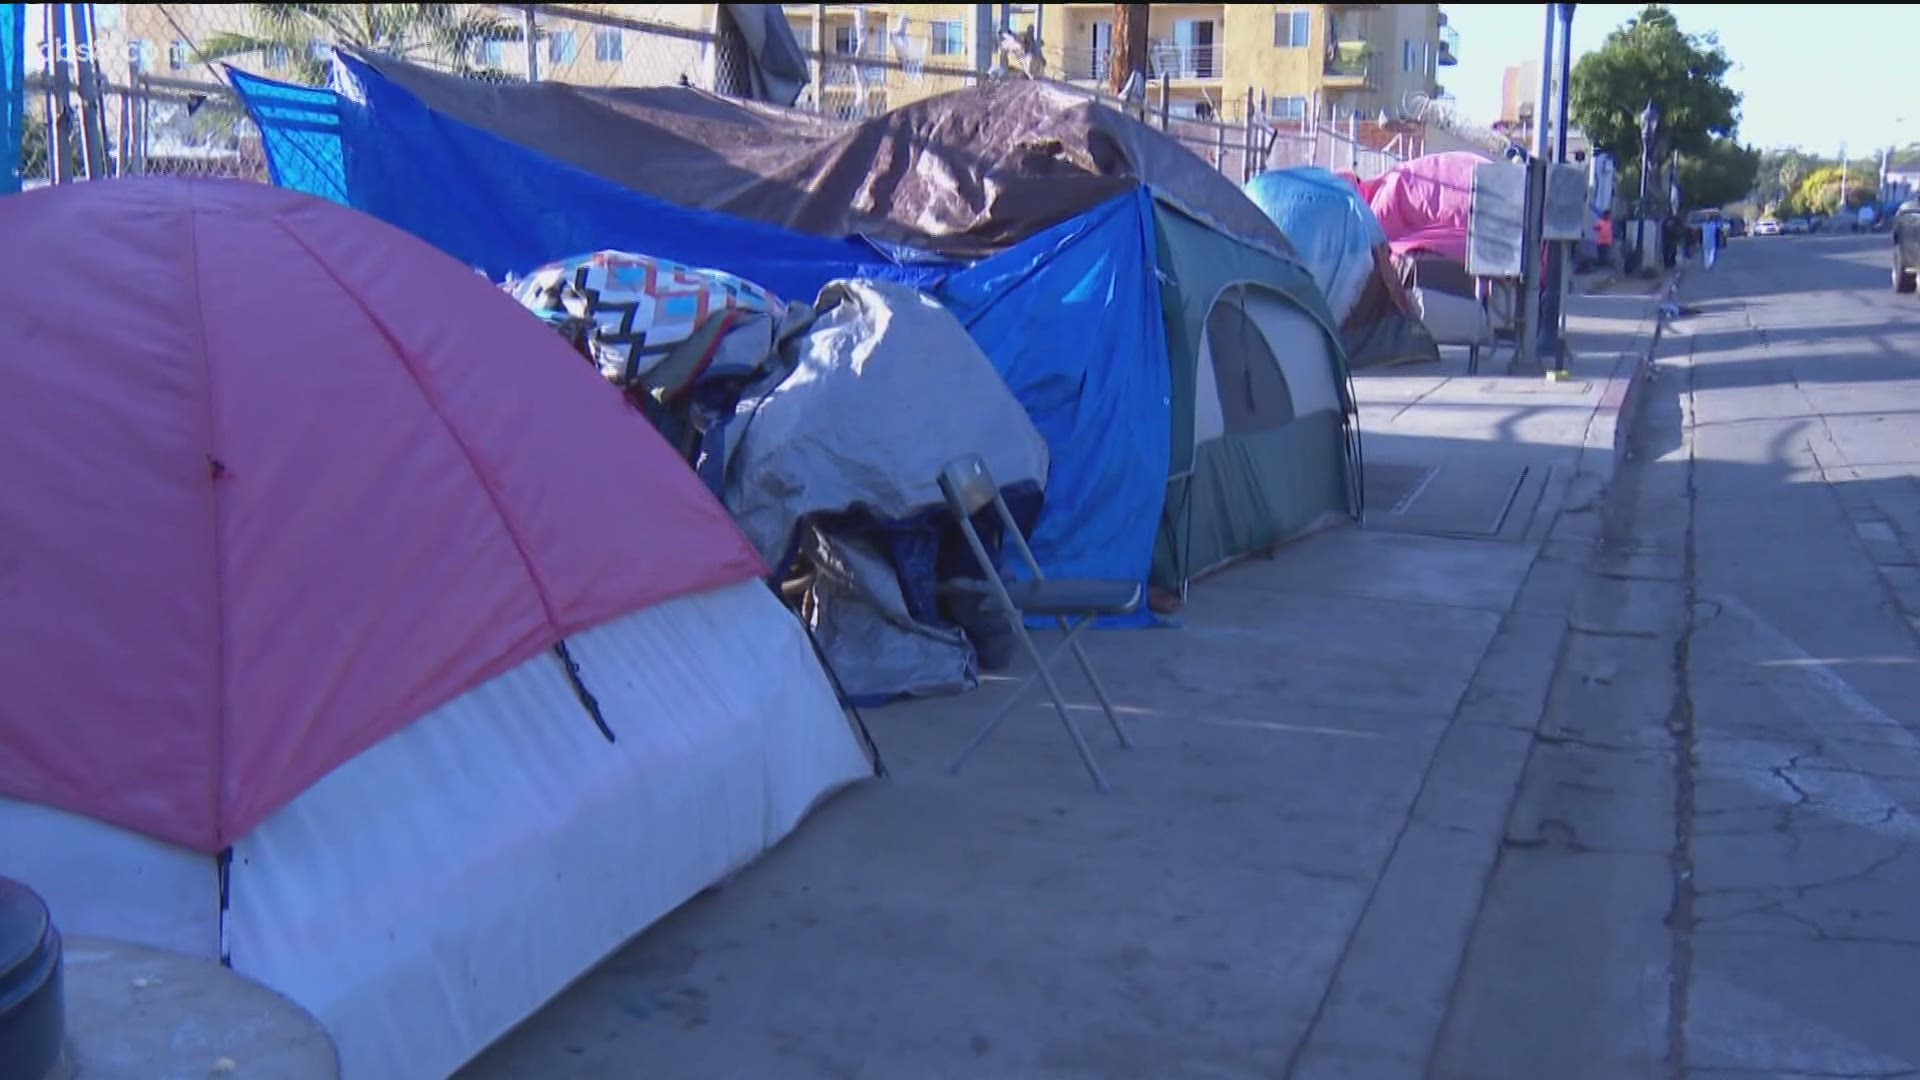 San Diego City officials acknowledge the issue, saying resolving homelessness is a top priority.